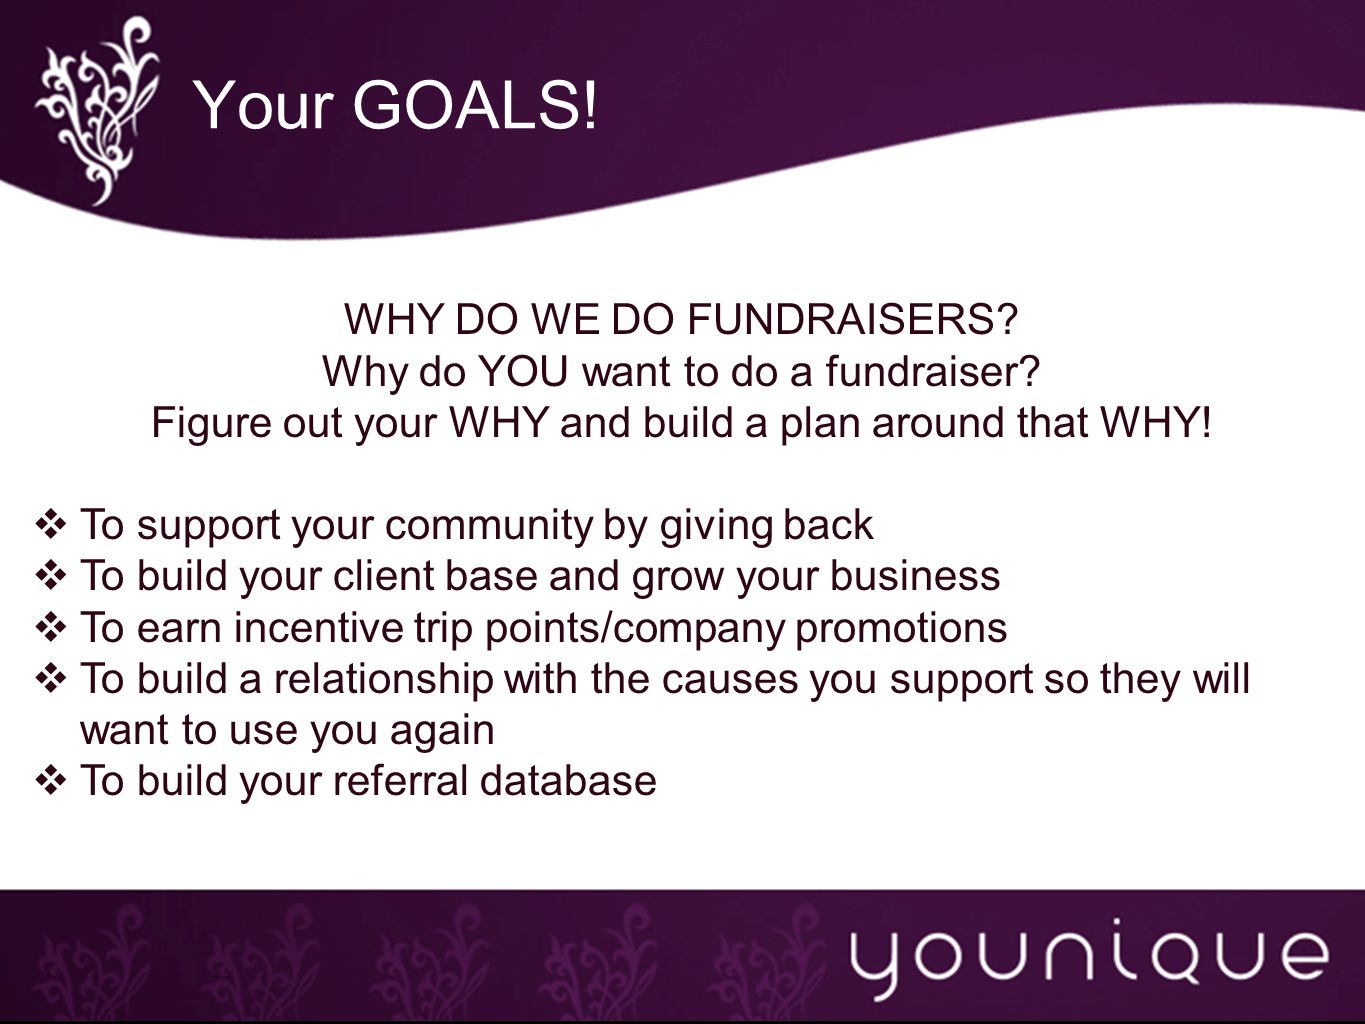 Your GOALS. WHY DO WE DO FUNDRAISERS. Why do YOU want to do a fundraiser.